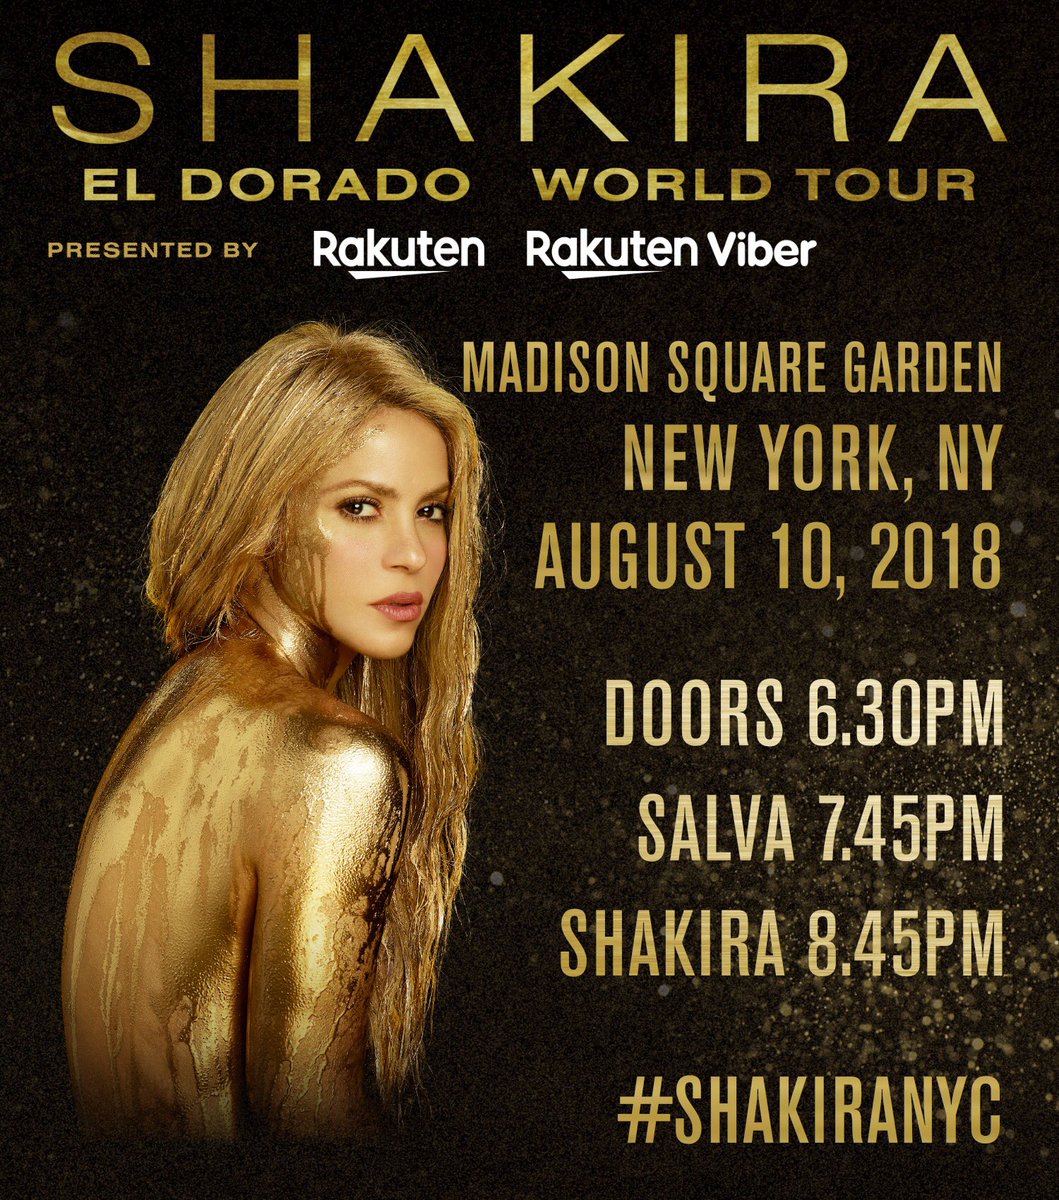 Good morning New York! Here are the times for tonight’s Sold Out #ShakiraNYC show at @TheGarden! ShakHQ https://t.co/GnlStSMKDJ